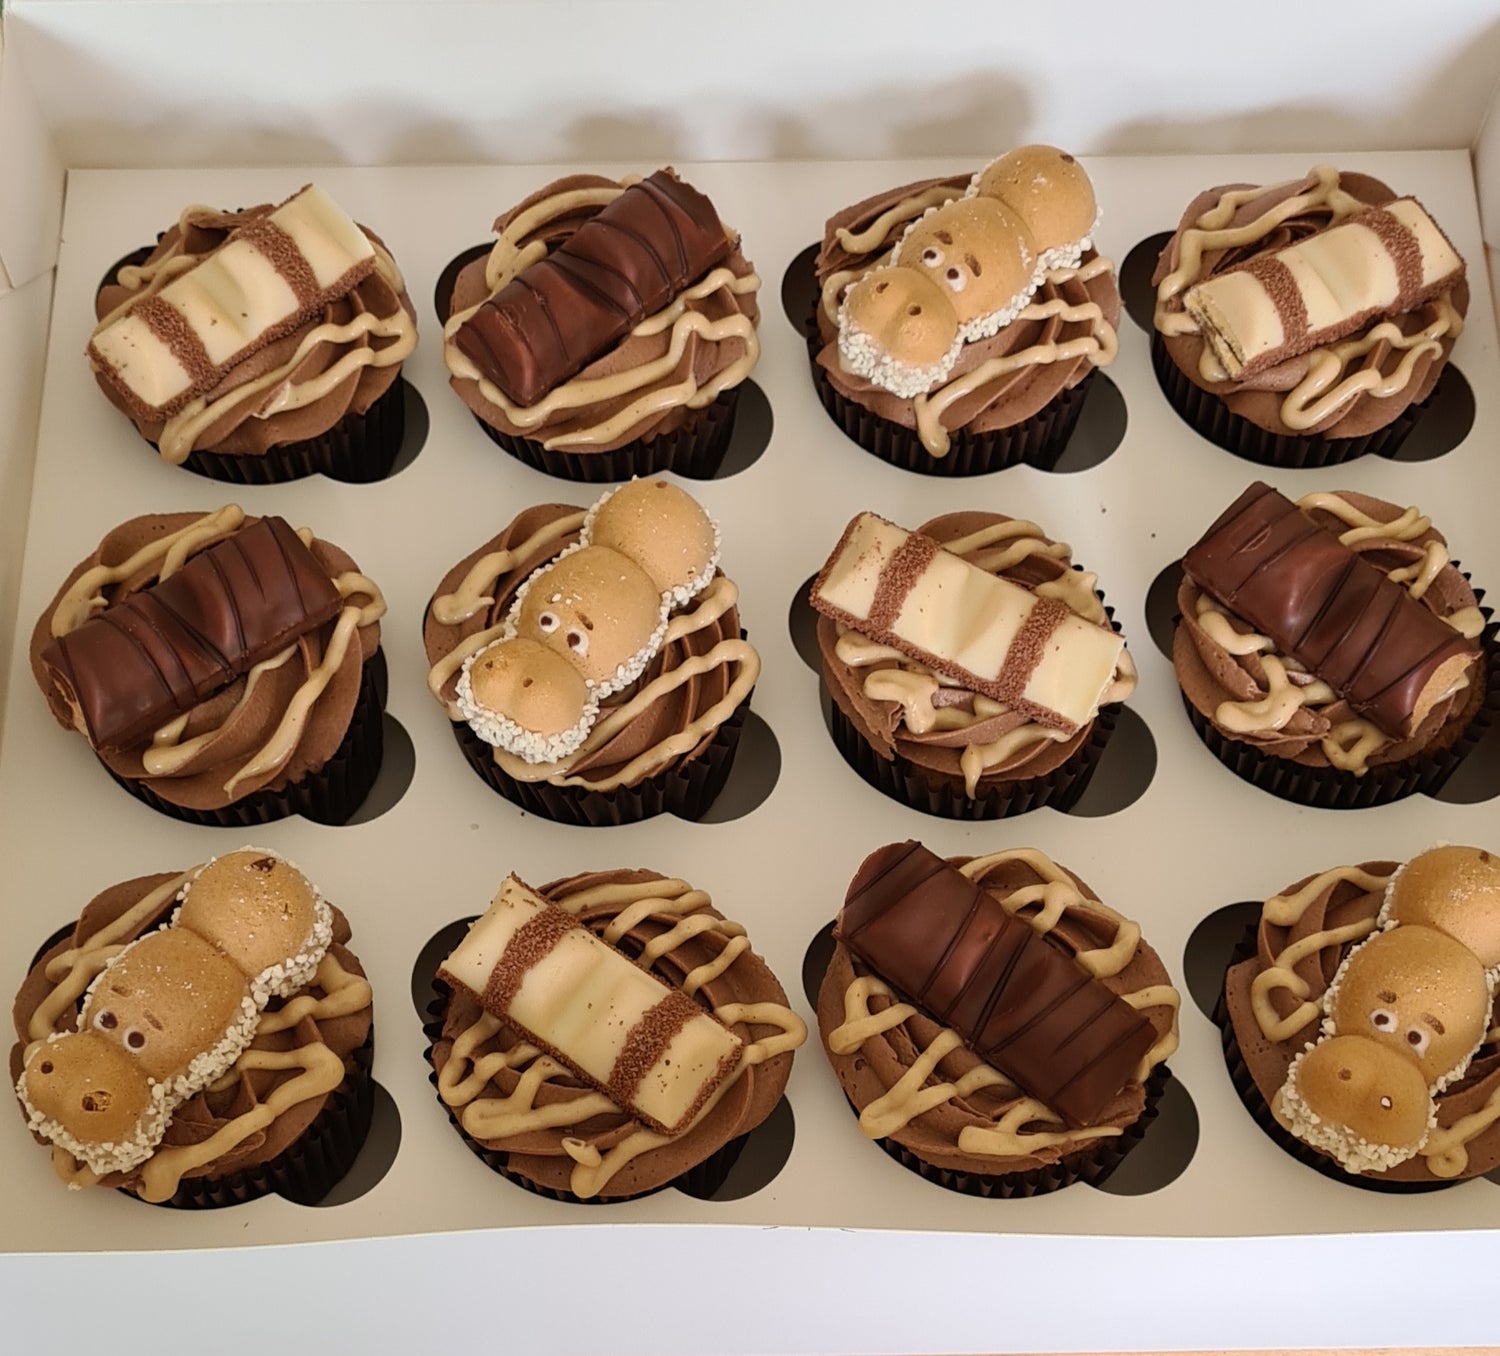 Kinder bueno cupcakes, topped with kinder bueno bars and hungry hippos! (Don't worry, they don't bite they are well trained!)